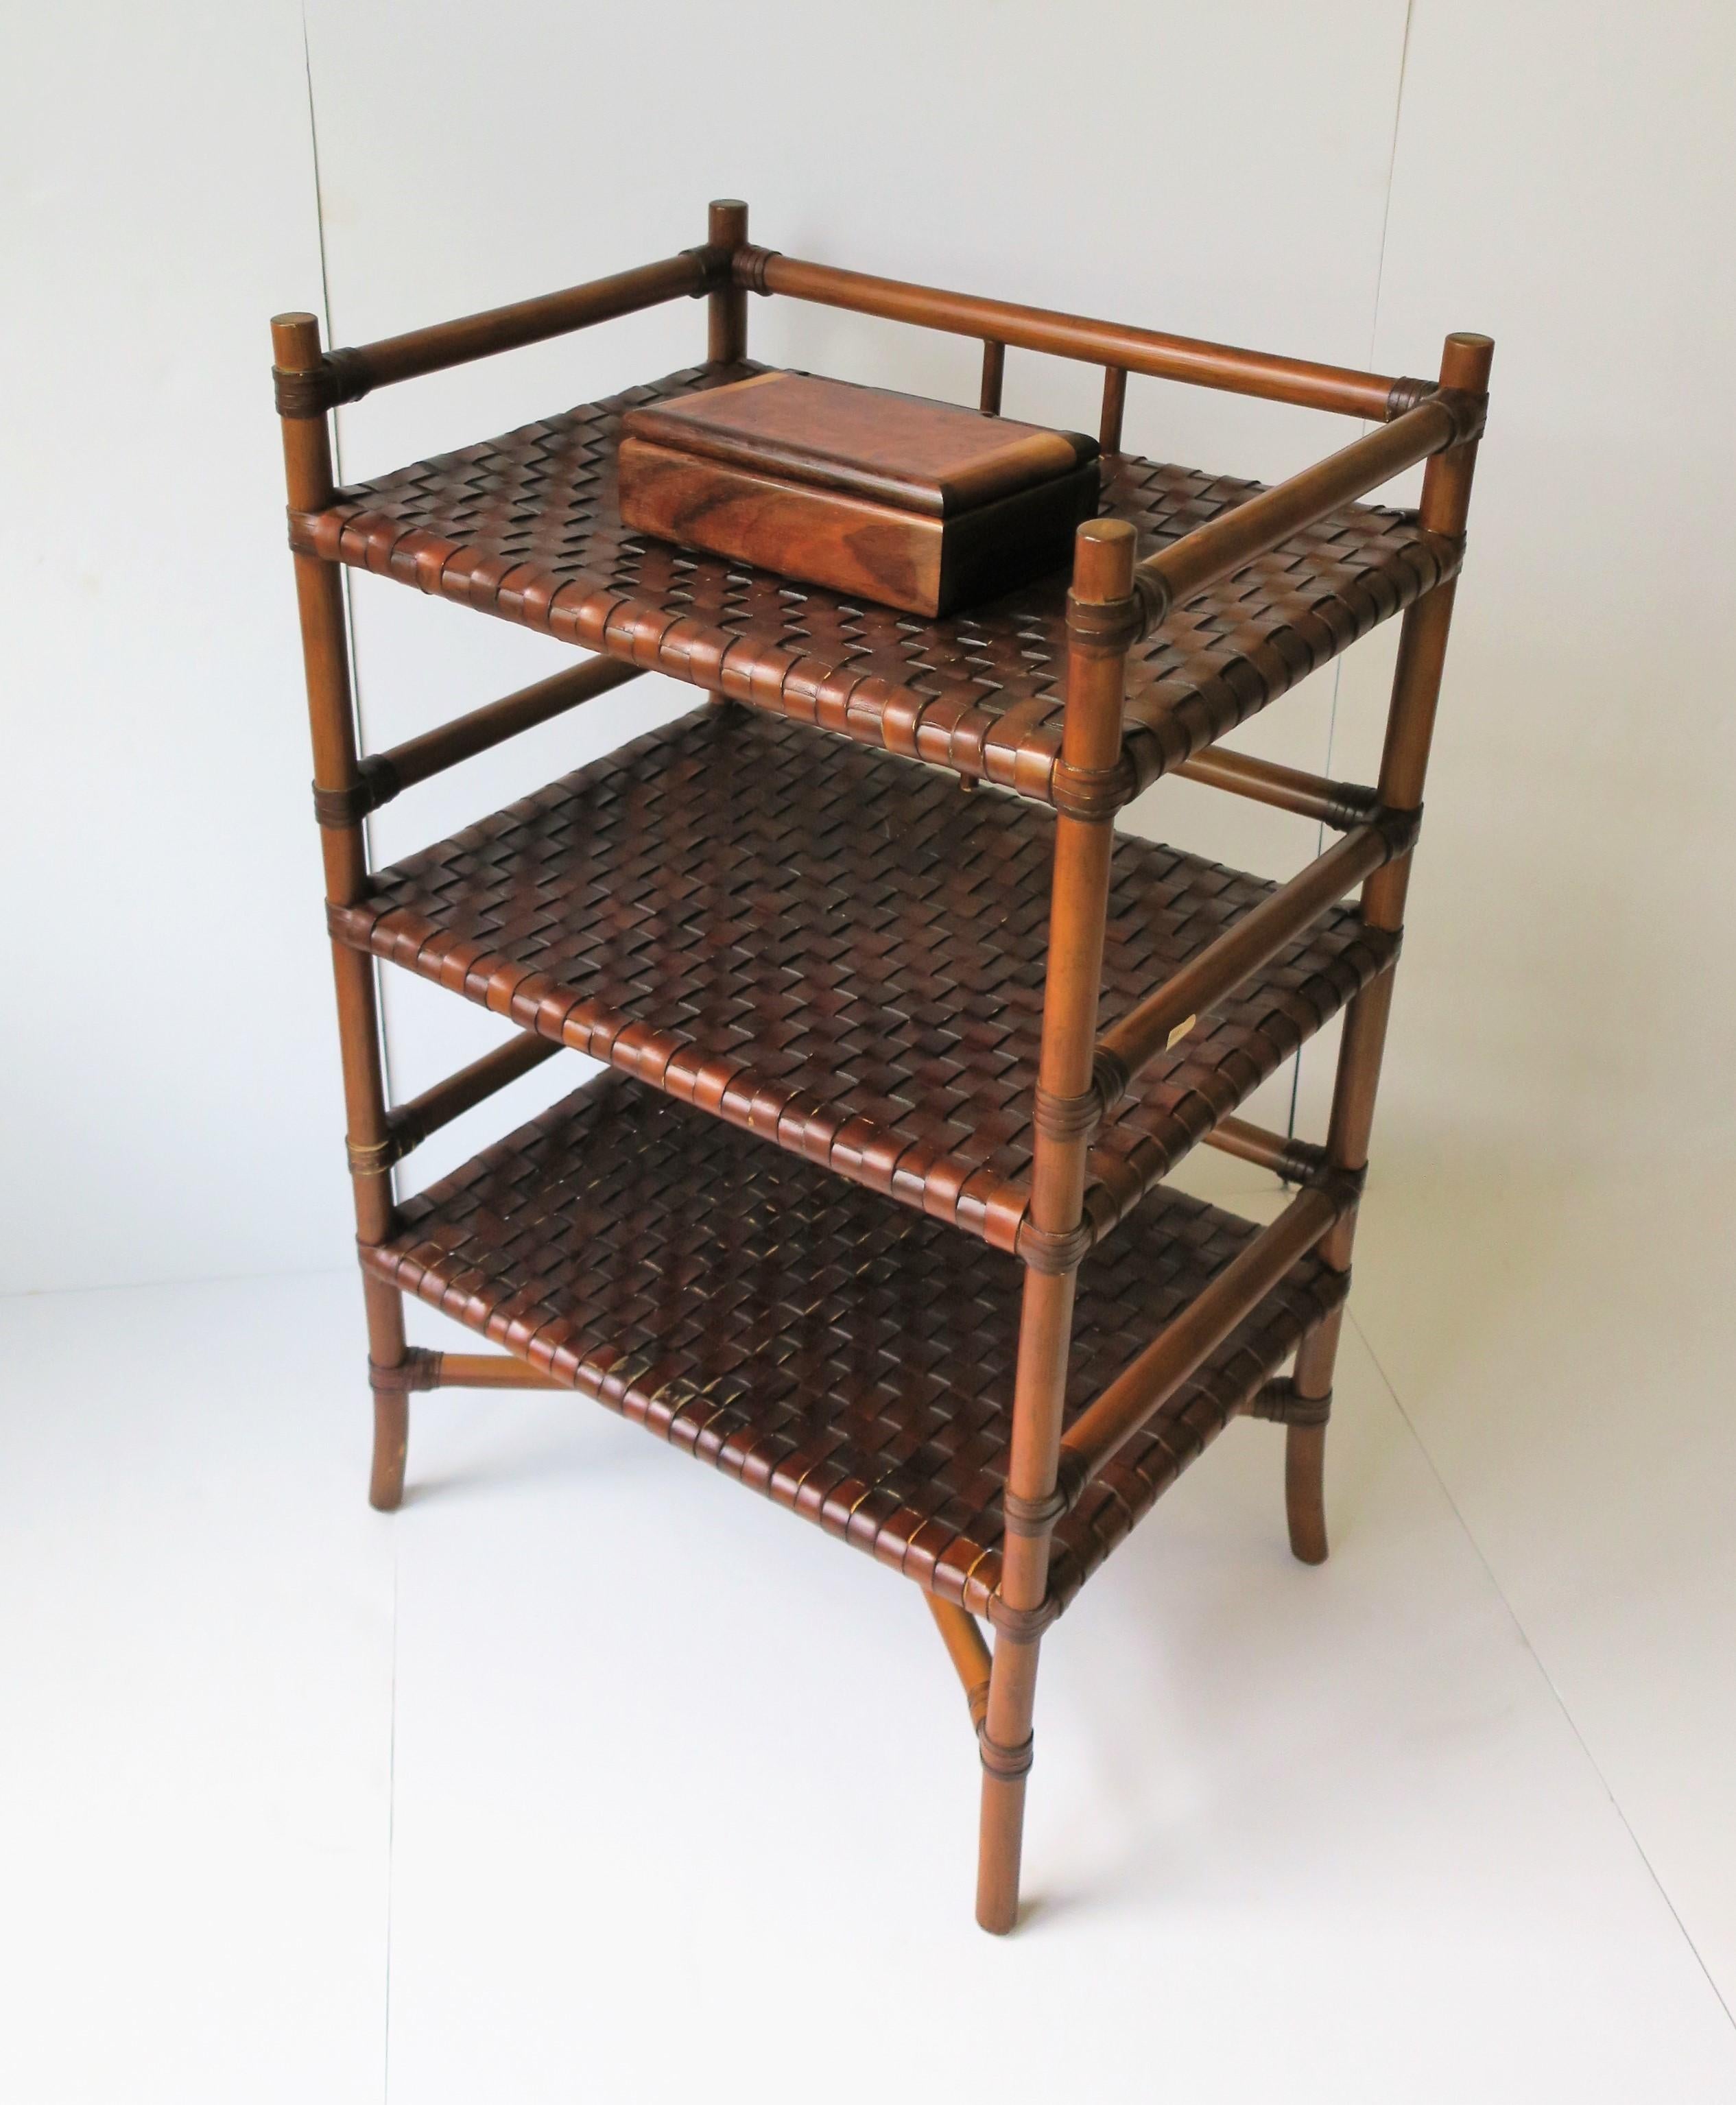 American Storage Étagère with Leather Weaved Shelves